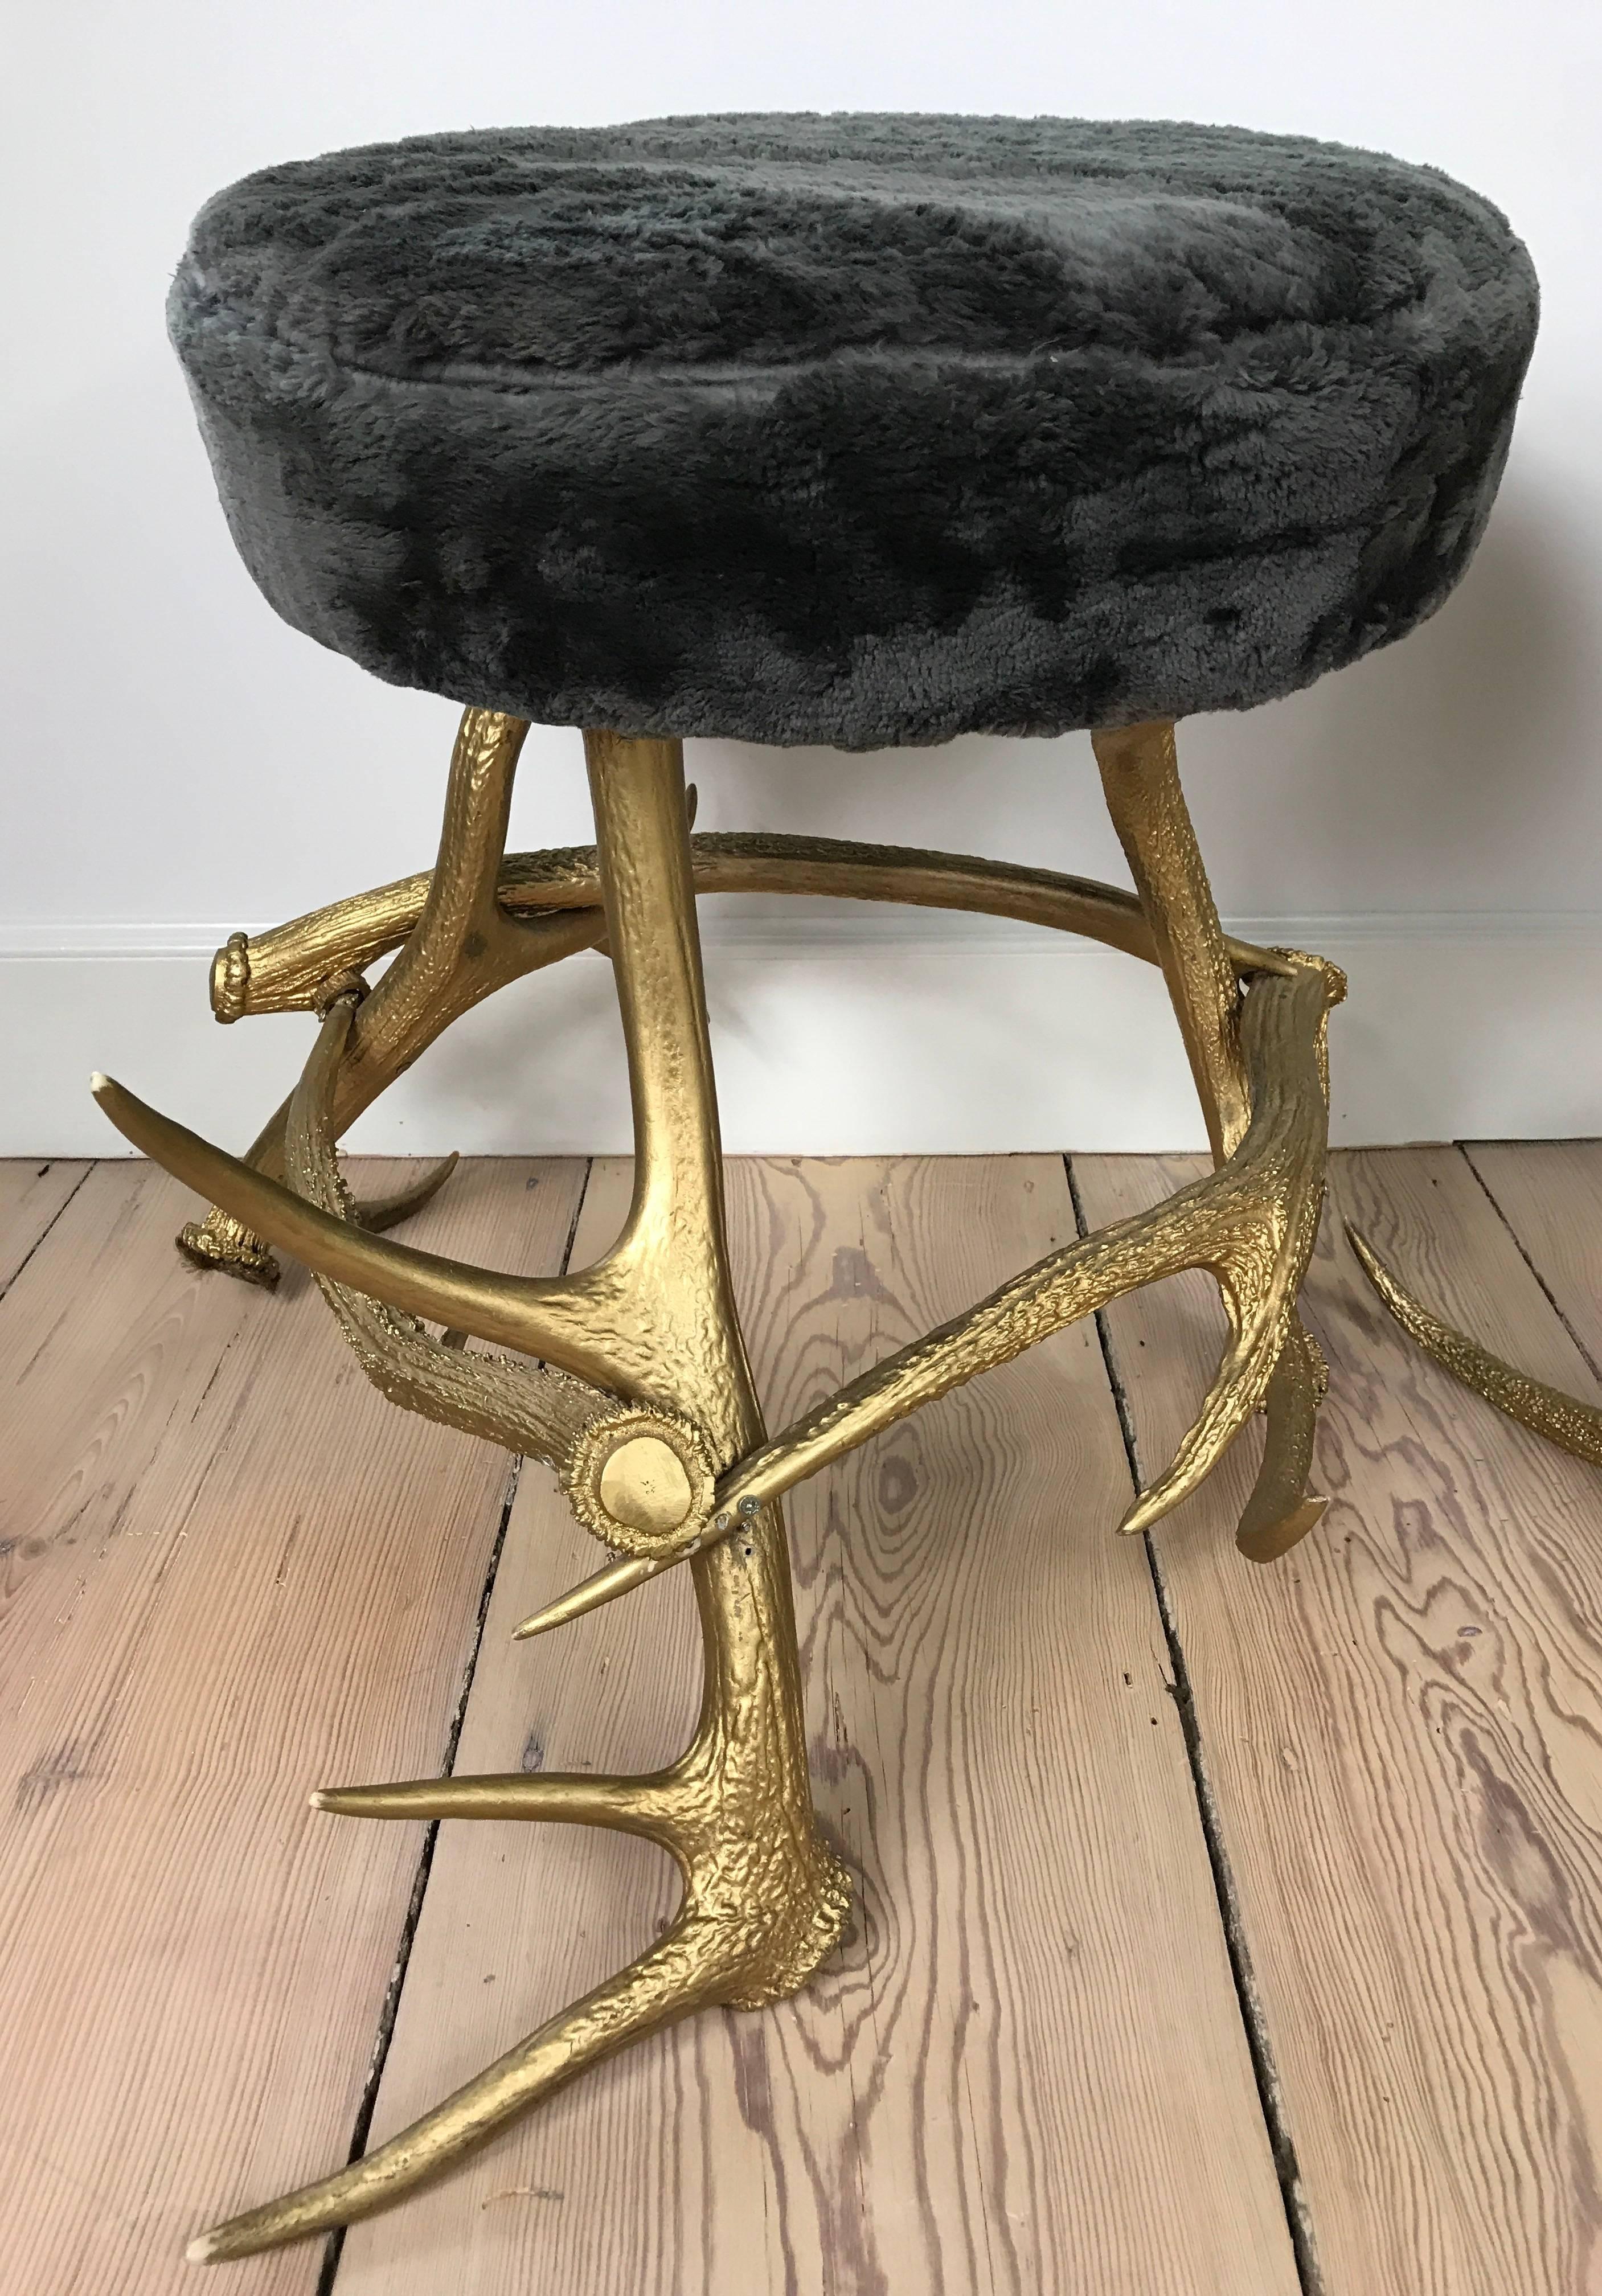 A pair of custom-made antler stools with gold painted finish and soft grey beaver fur upholstery.